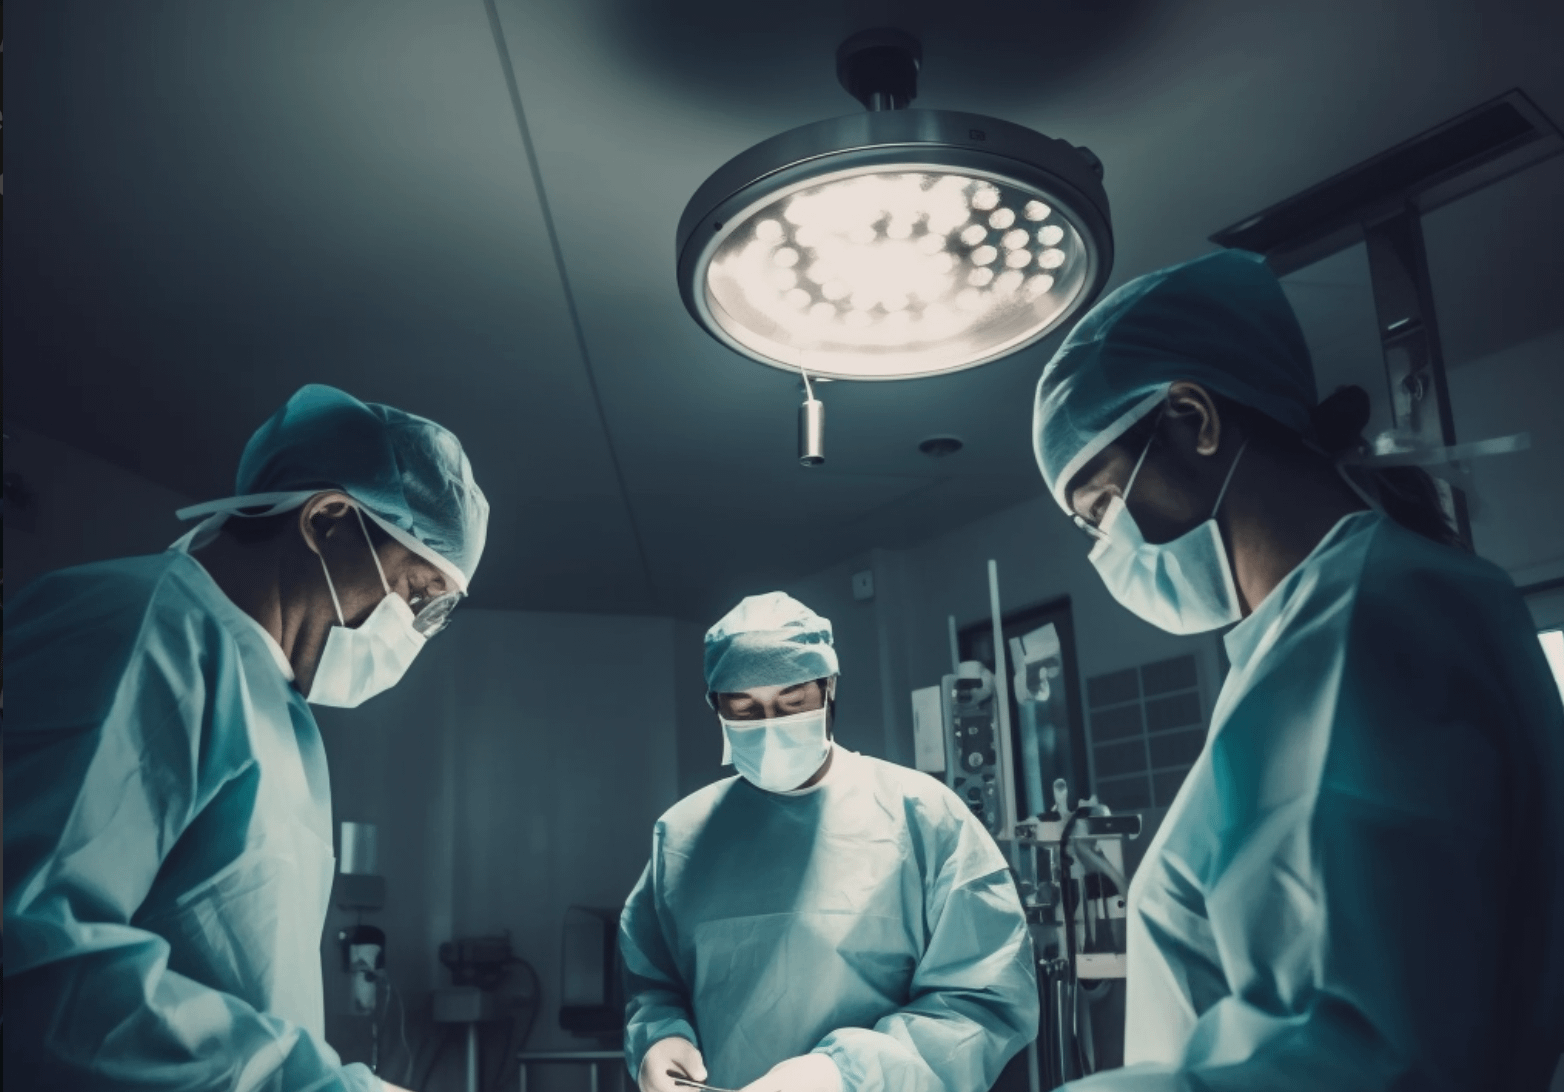 A group of 3 surgeons in an OT about to operate on a patient